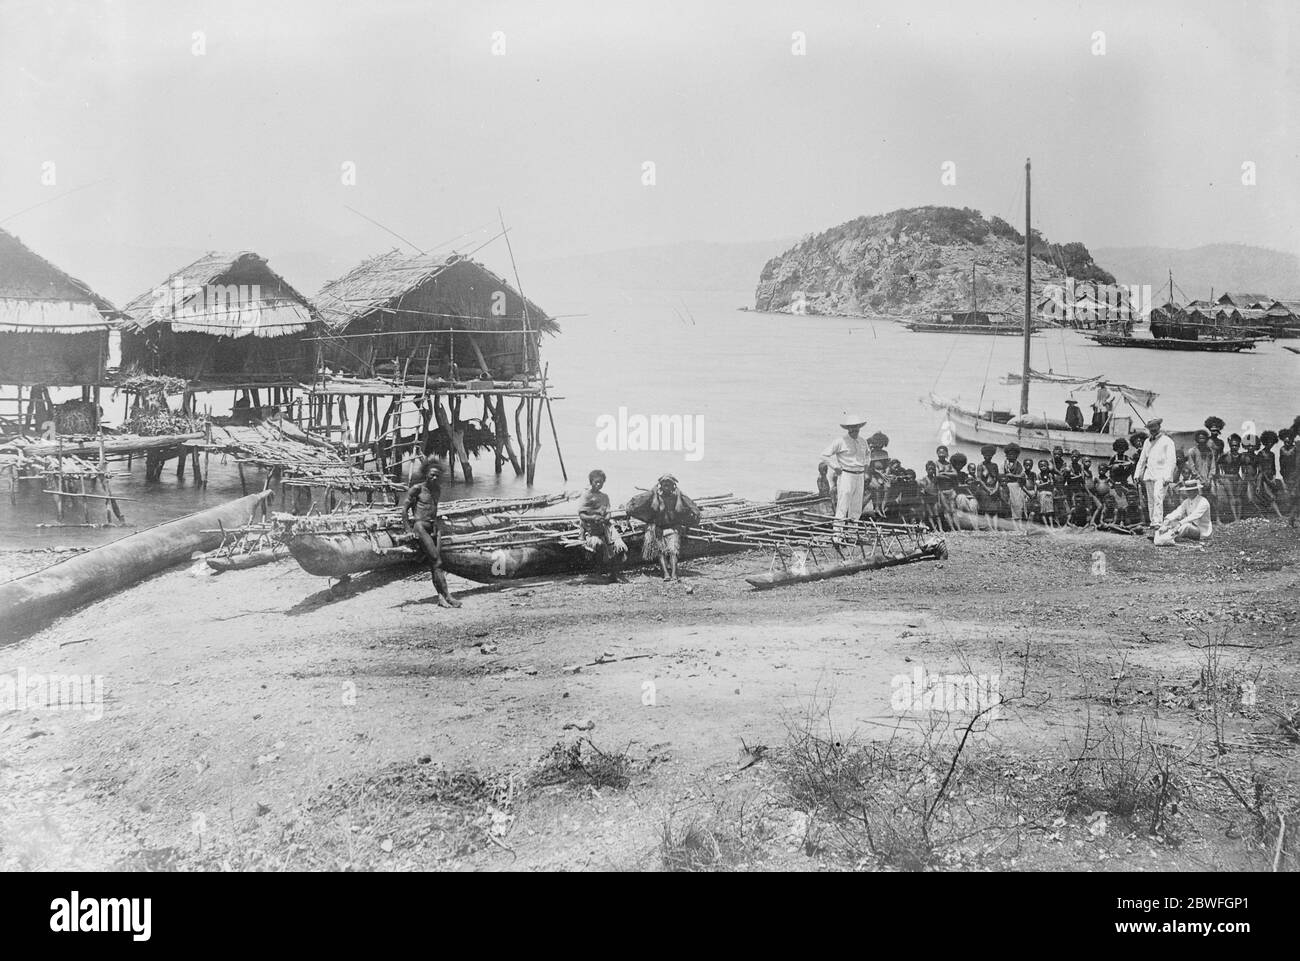 British Papua New Guinea Port Moresby or Pot Mosbi in Tok Pisin, the capital and largest city of Papua New Guinea 13 April 1922 Stock Photo